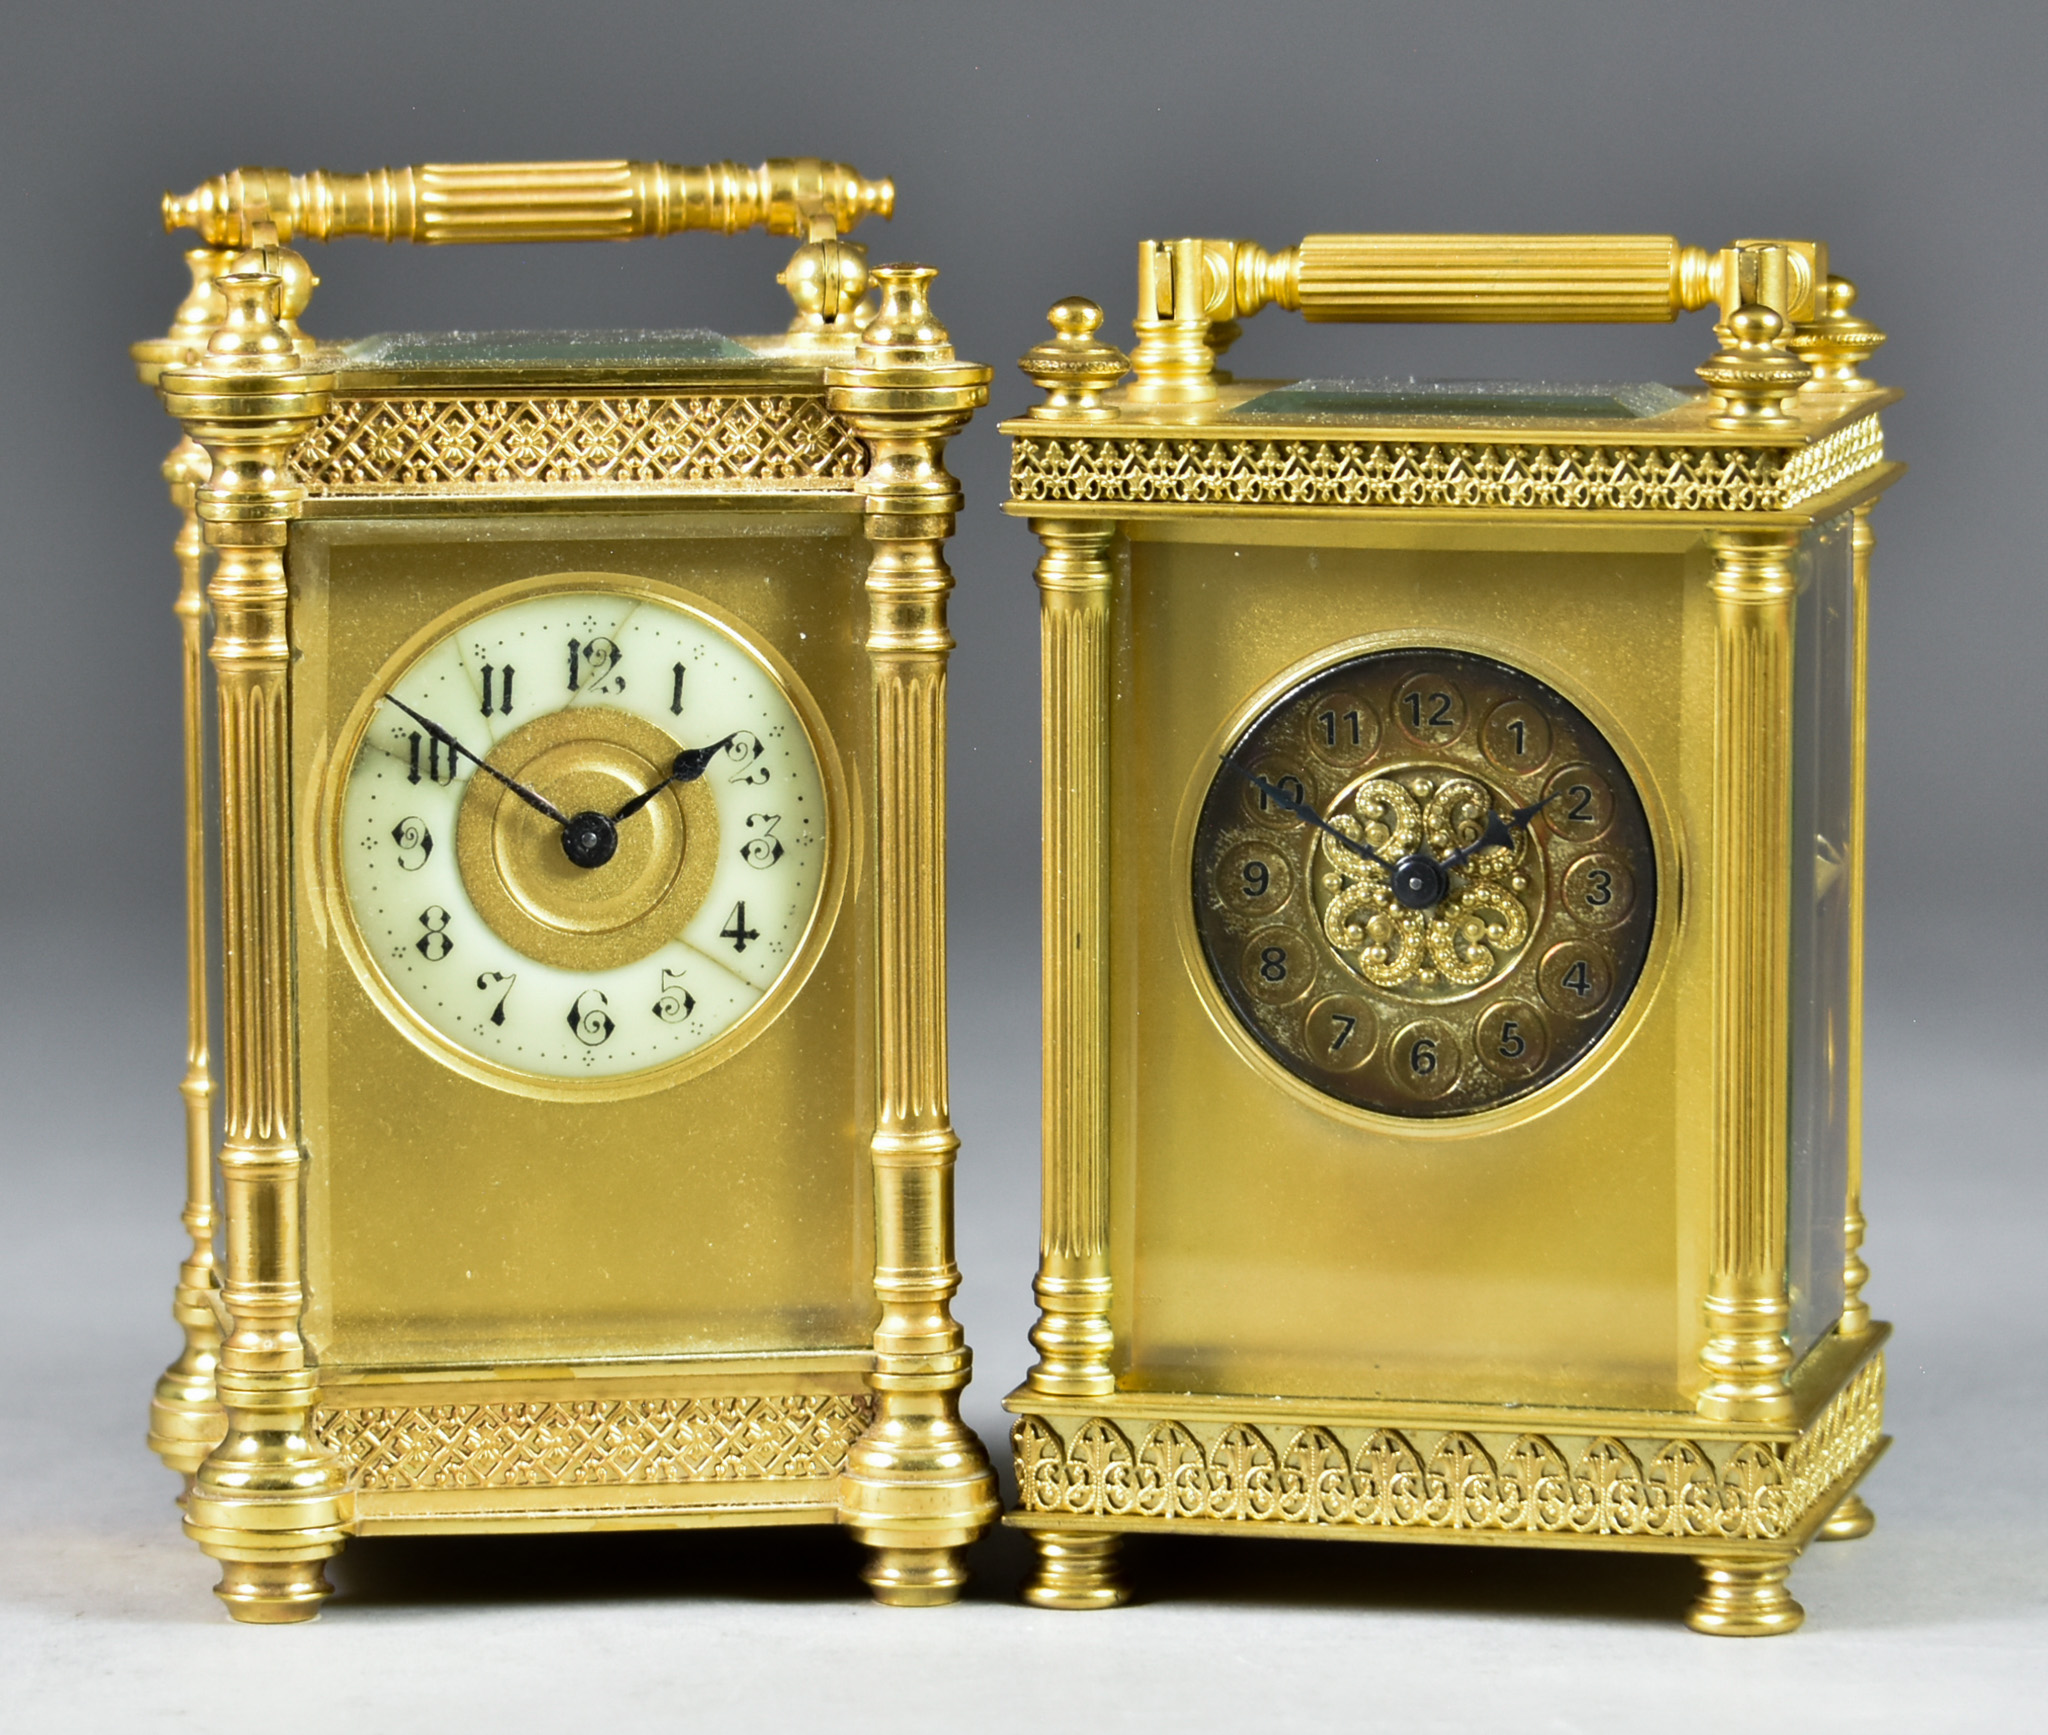 Two Late 19th/Early 20th Century French Carriage Timepieces, one with 1.75ins diameter cream